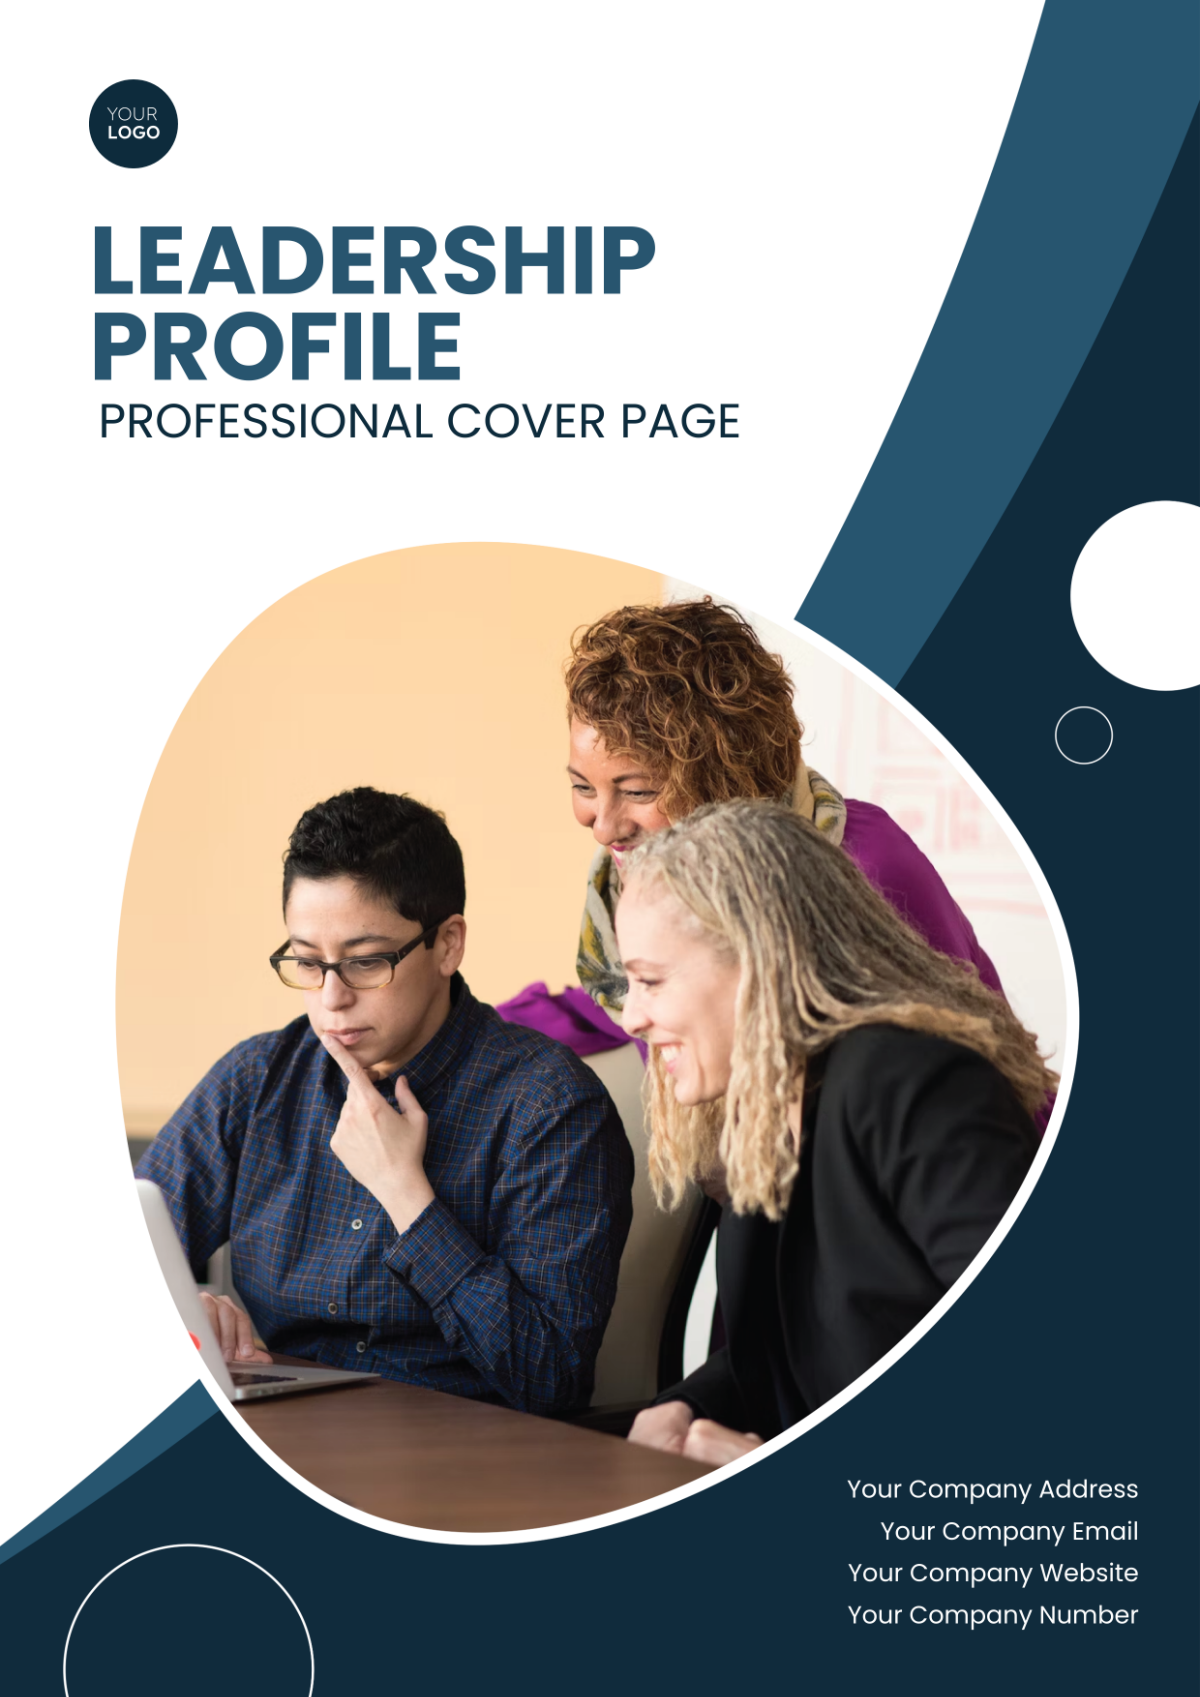 Leadership Profile Professional Cover Page